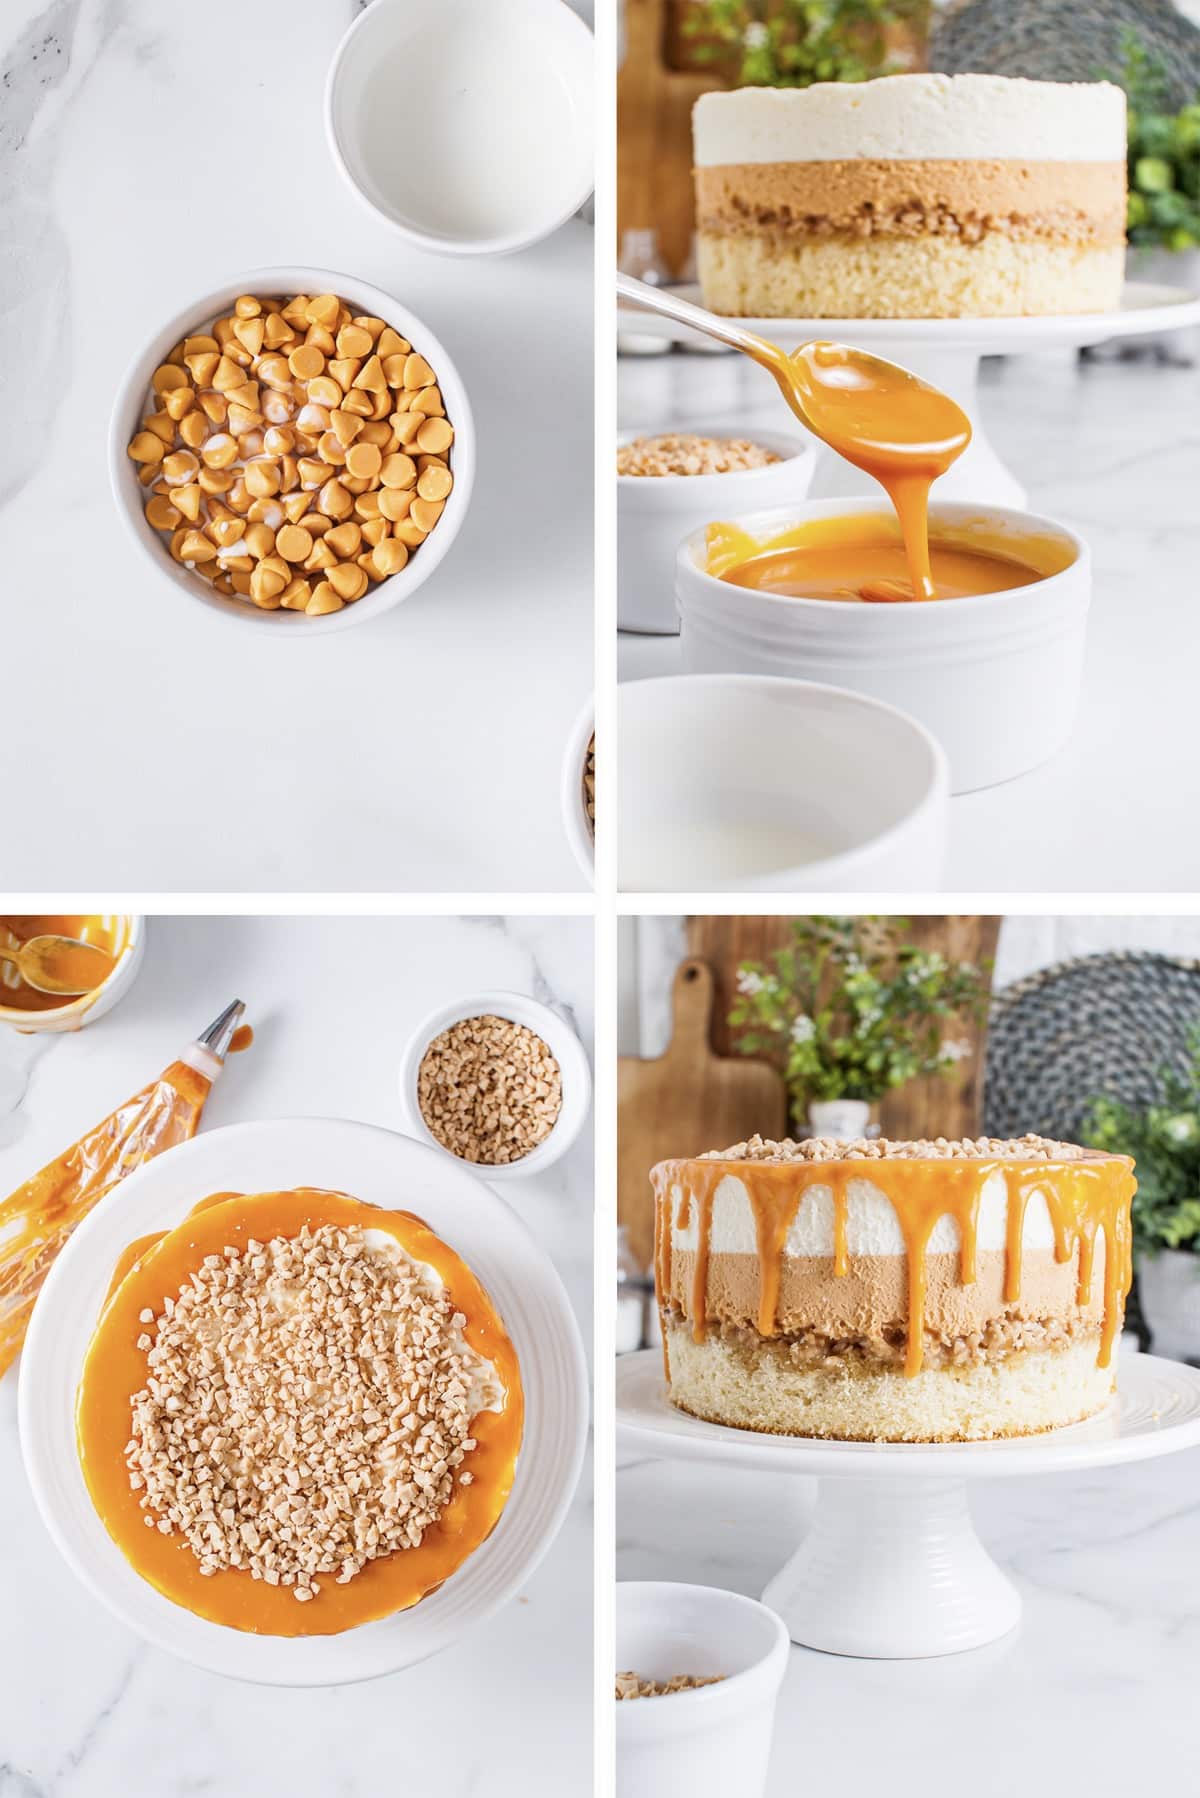 Collage of images showing how to make the butterscotch ganache drip for white chocolate mousse cake